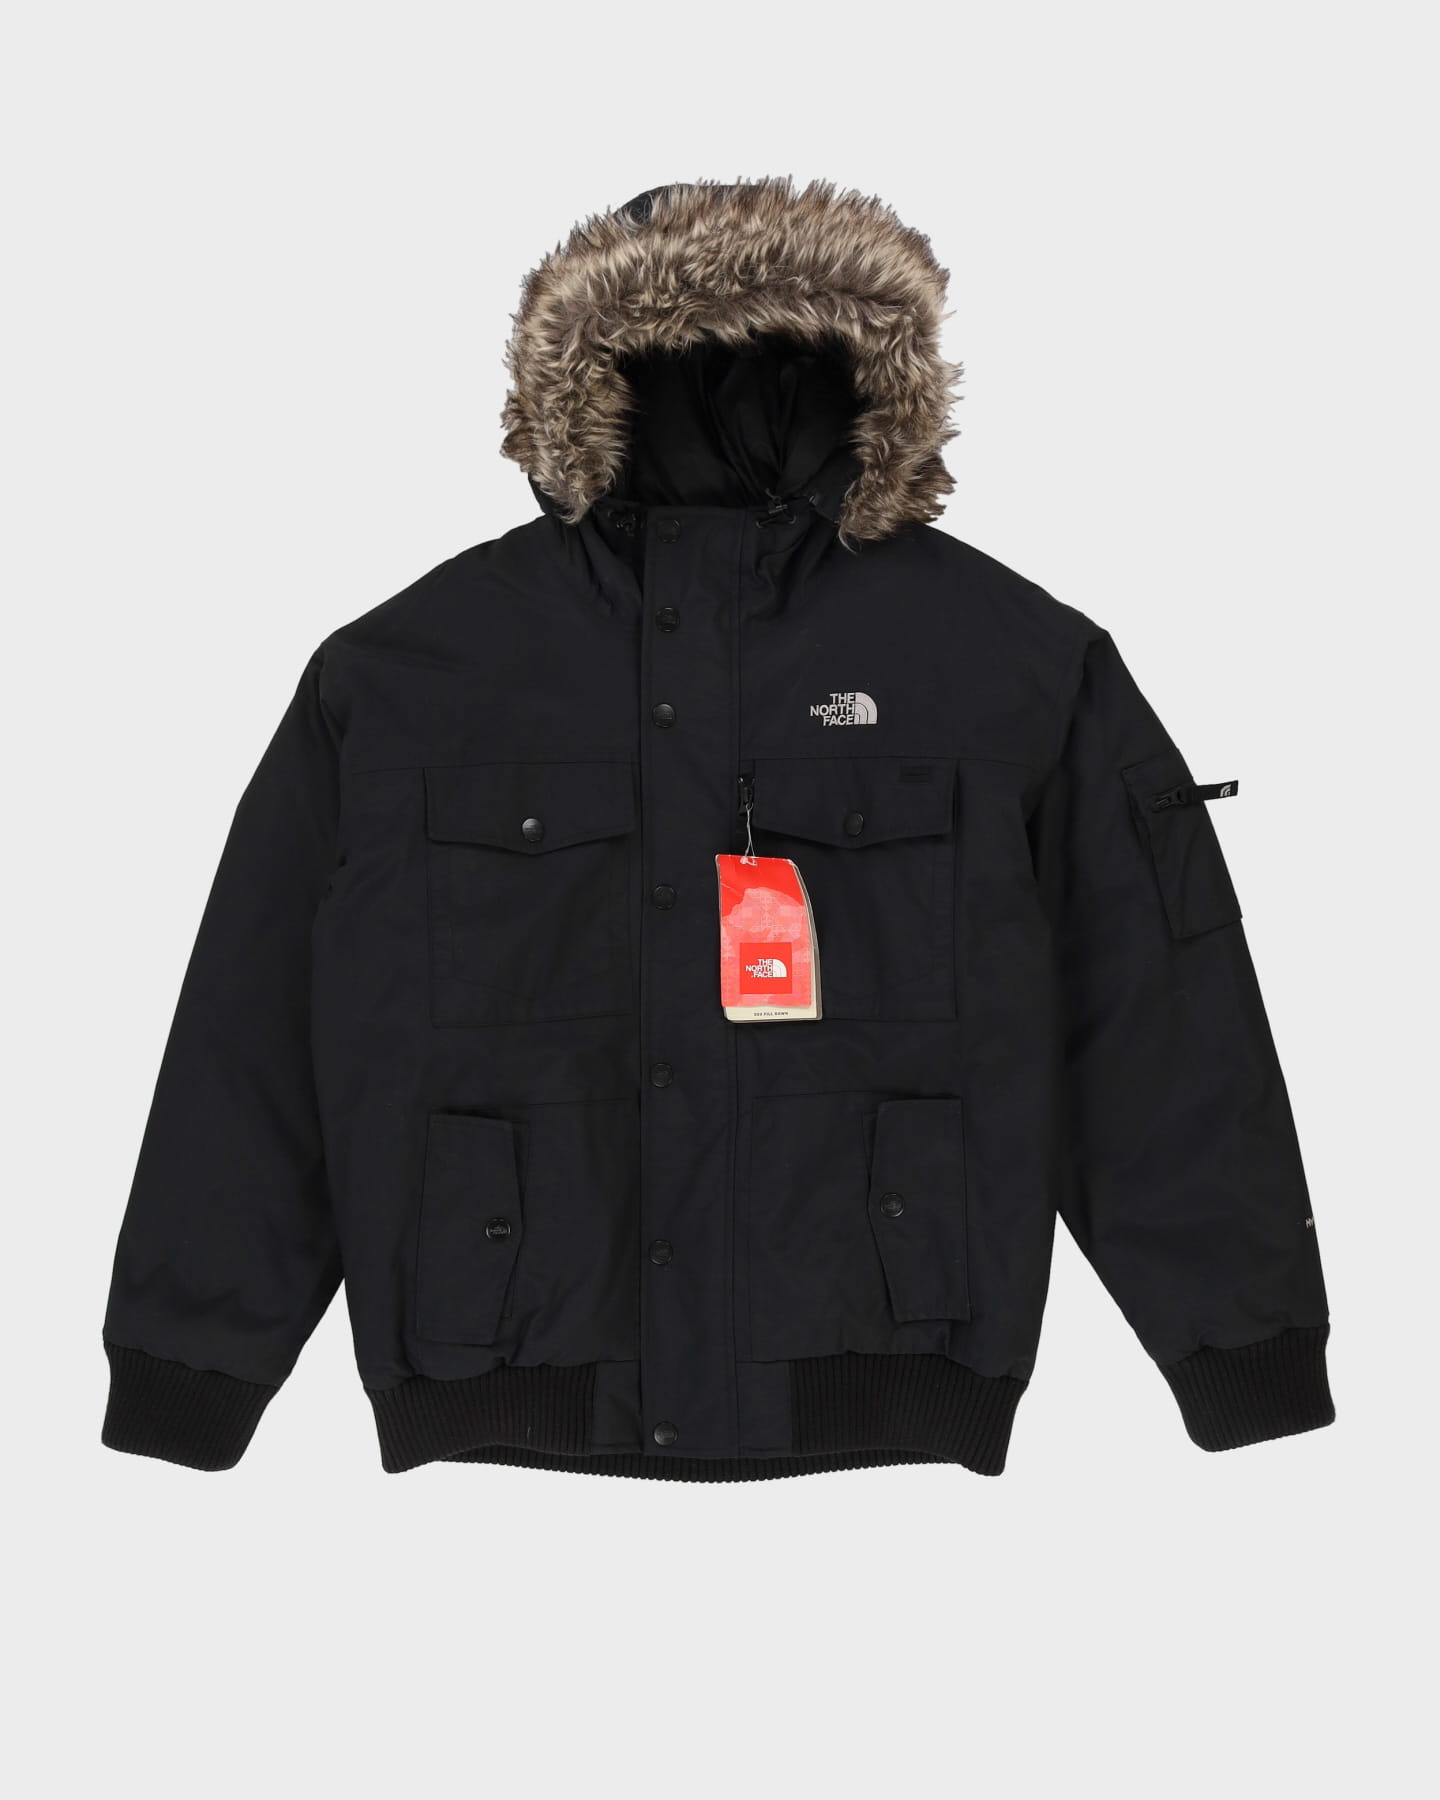 Deadstock With Tags The North Face Black 550 Fill Down HyVent Hooded Puffer Jacket - L